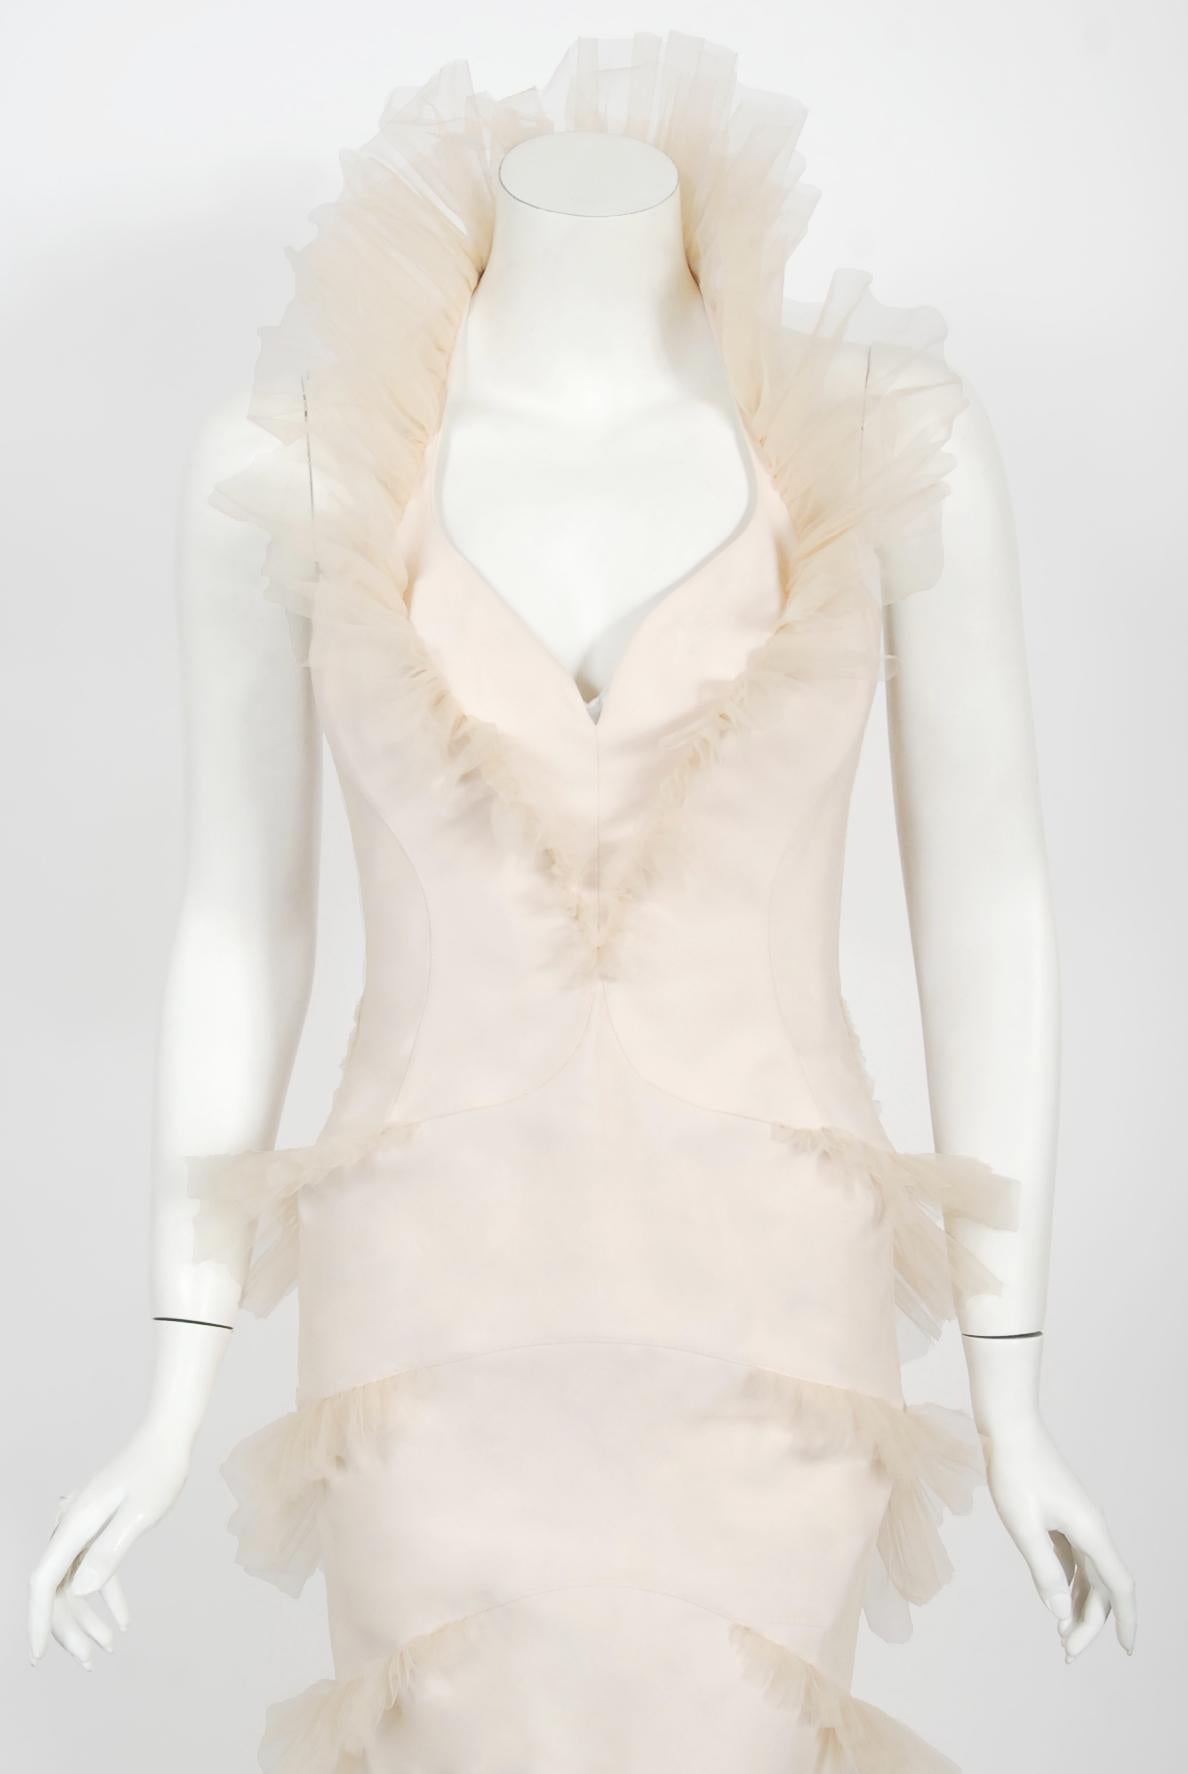 An absolutely breathtaking and highly coveted Thierry Mugler couture cream stretch-silk bustier hourglass tiered tulle gown dating back to his spring-summer 1992 collection. This legendary French fashion designer is known for bold fashion and edgy,